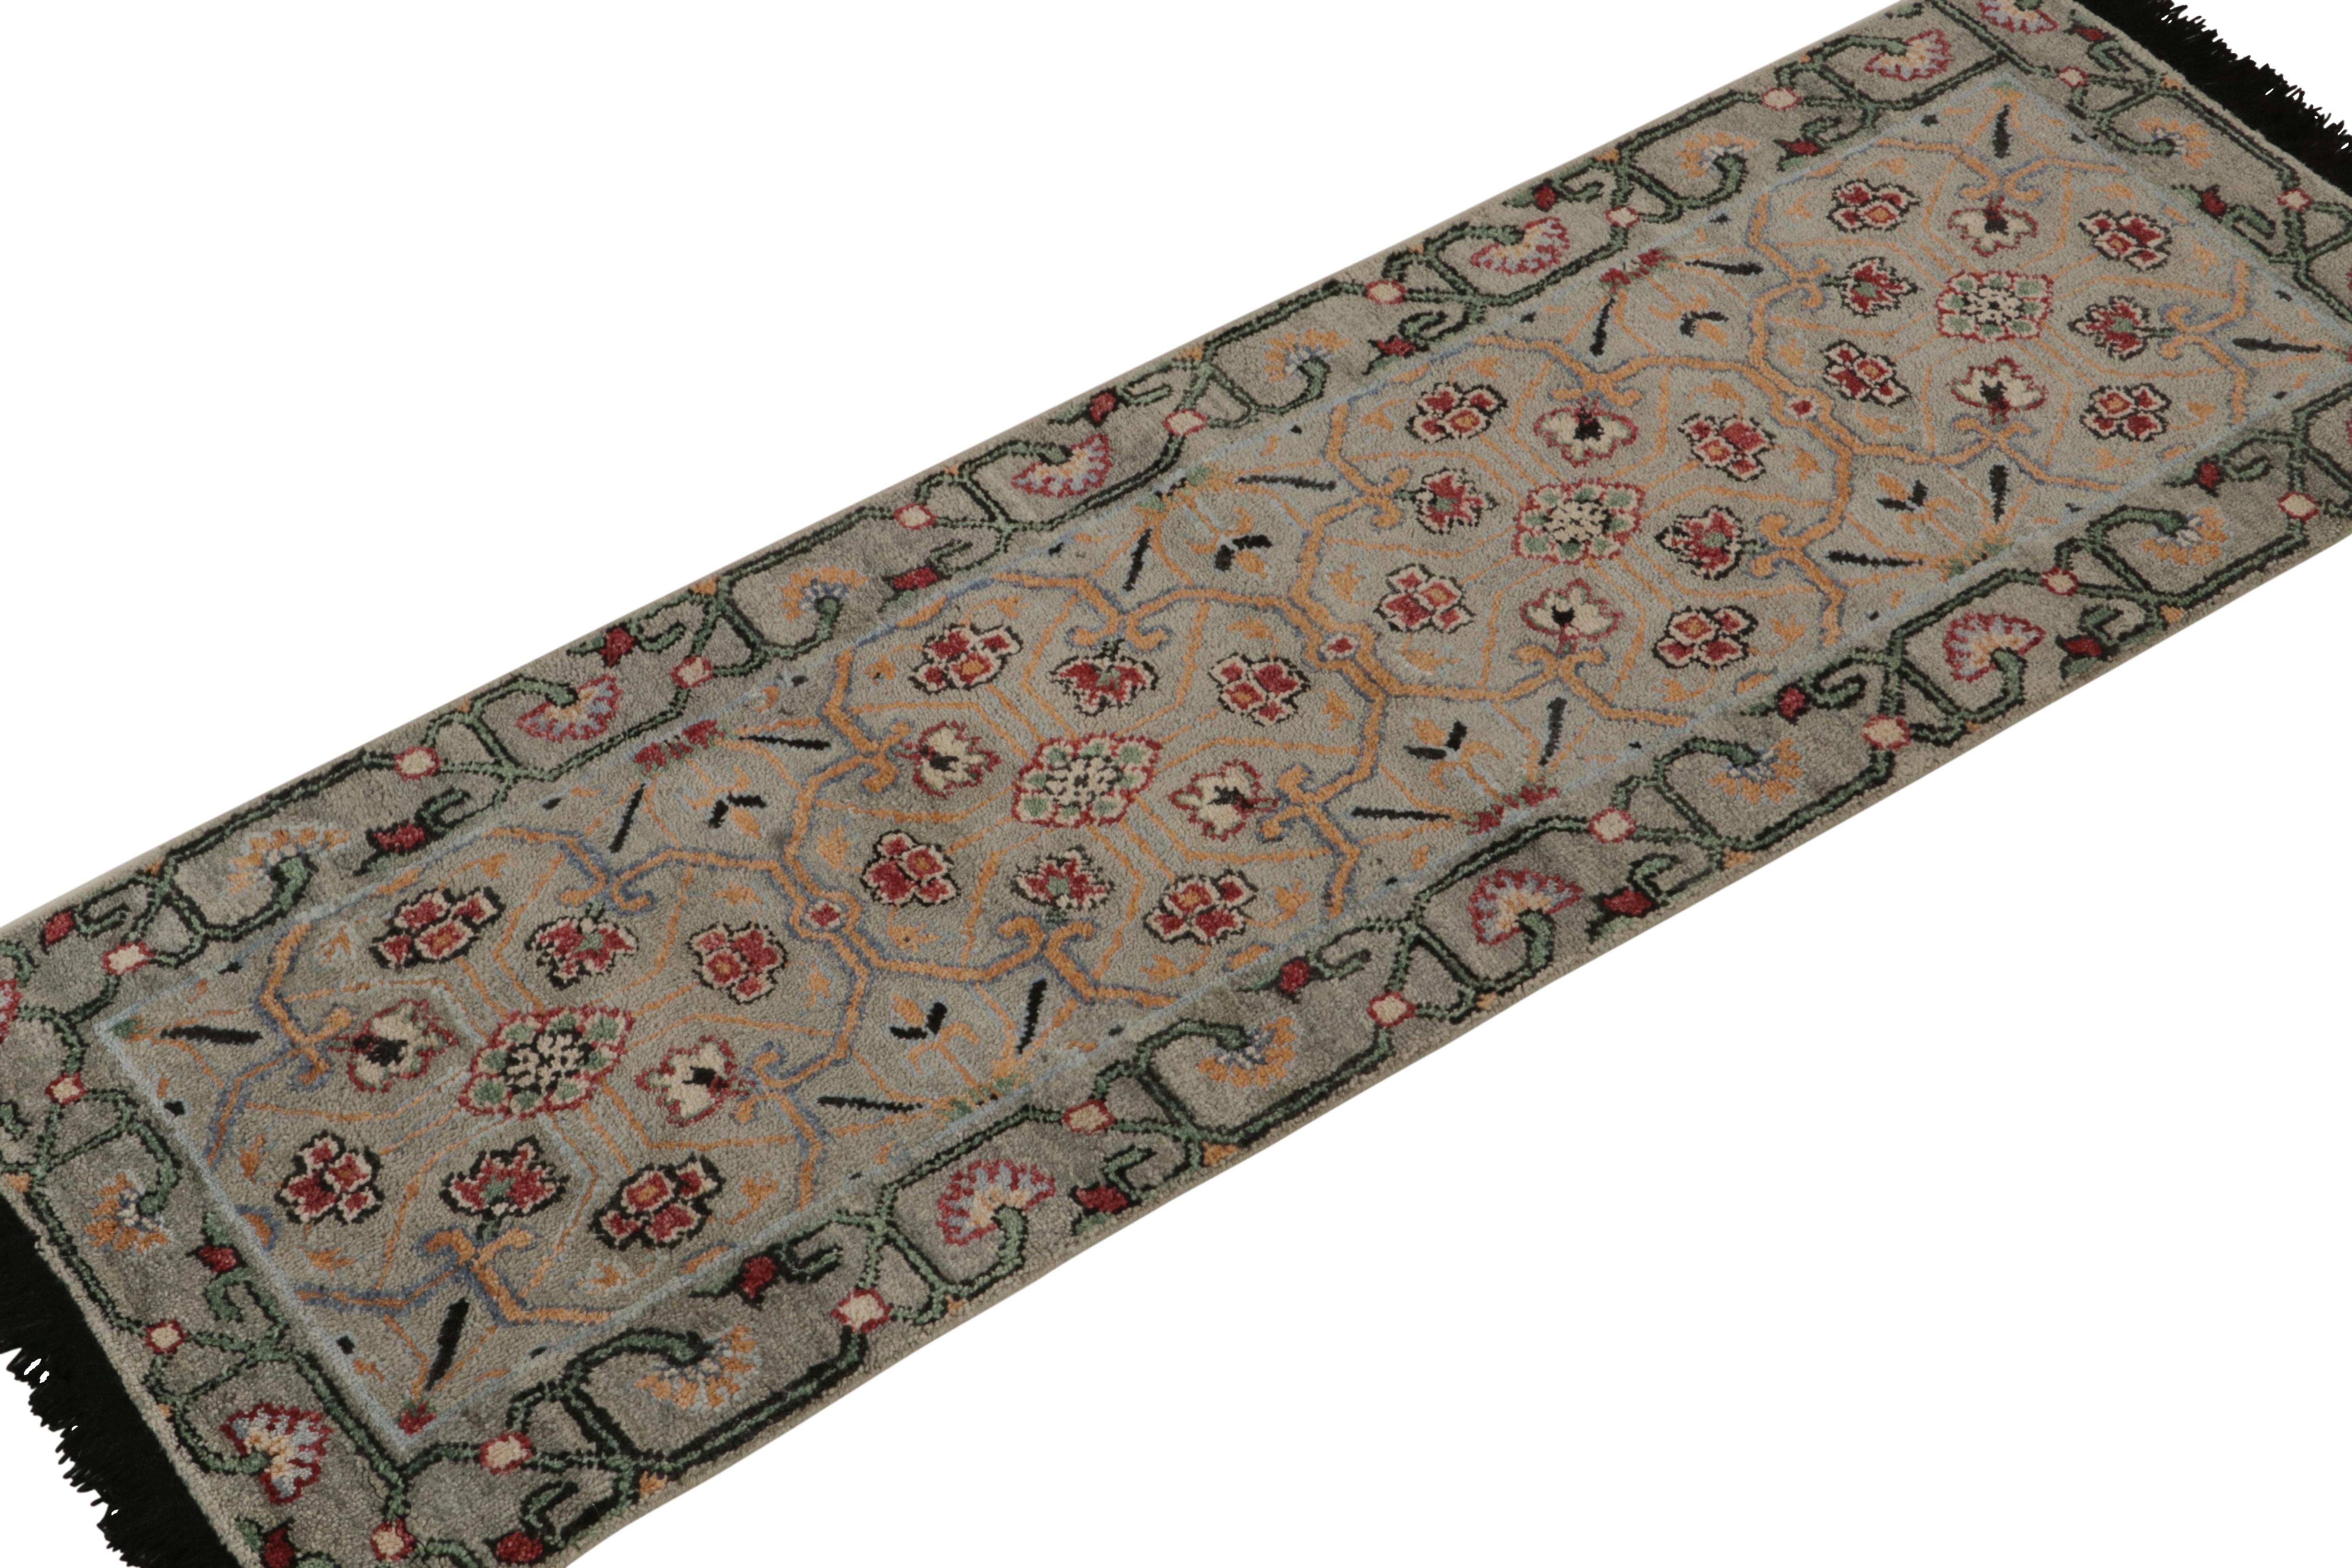 A 2x6 runner inspired by classic transitional rug styles, from Rug & Kilim’s Burano Black-Weft Collection. 

Hand-knotted in the softest Persian wool, enjoying green and blue with pink-red accents throughout all over floral patterns. Lending